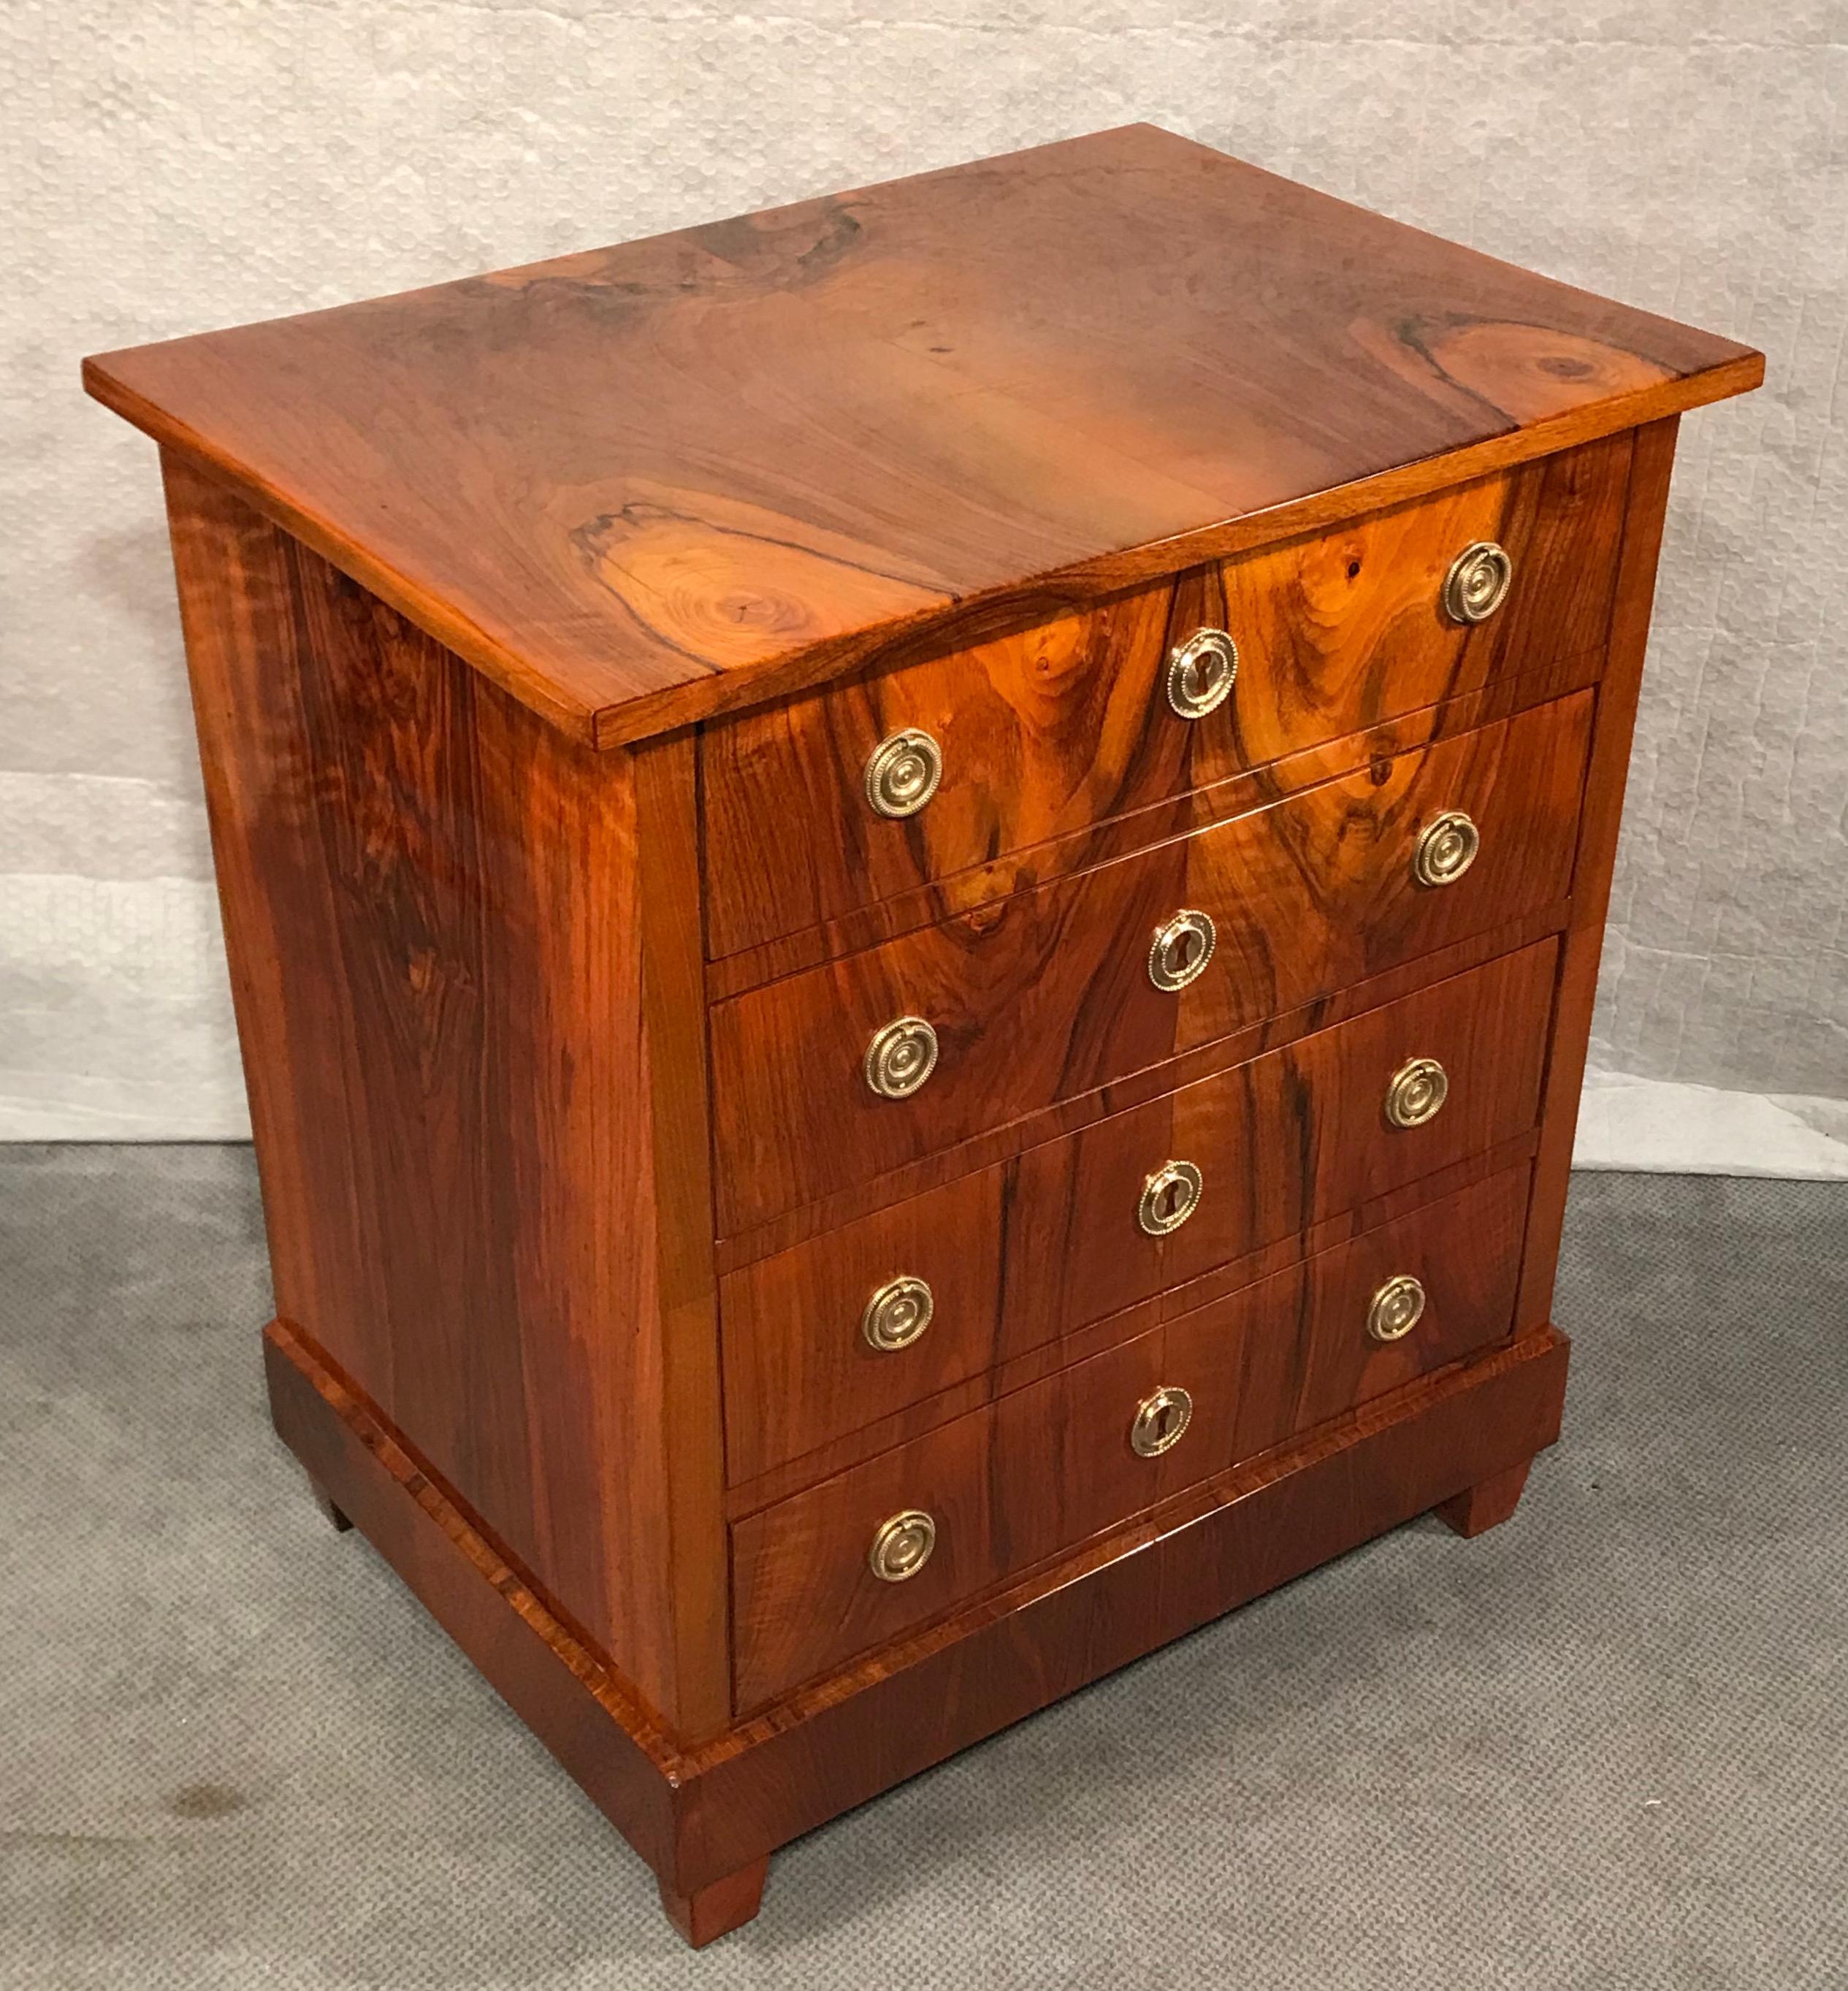 This small Biedermeier dresser dates back to around 1830. The four drawer commode has a very pretty walnut veneer on top, sides and front. 
It has been professionally refinished with a shellac polish. The straight lines of this piece and the